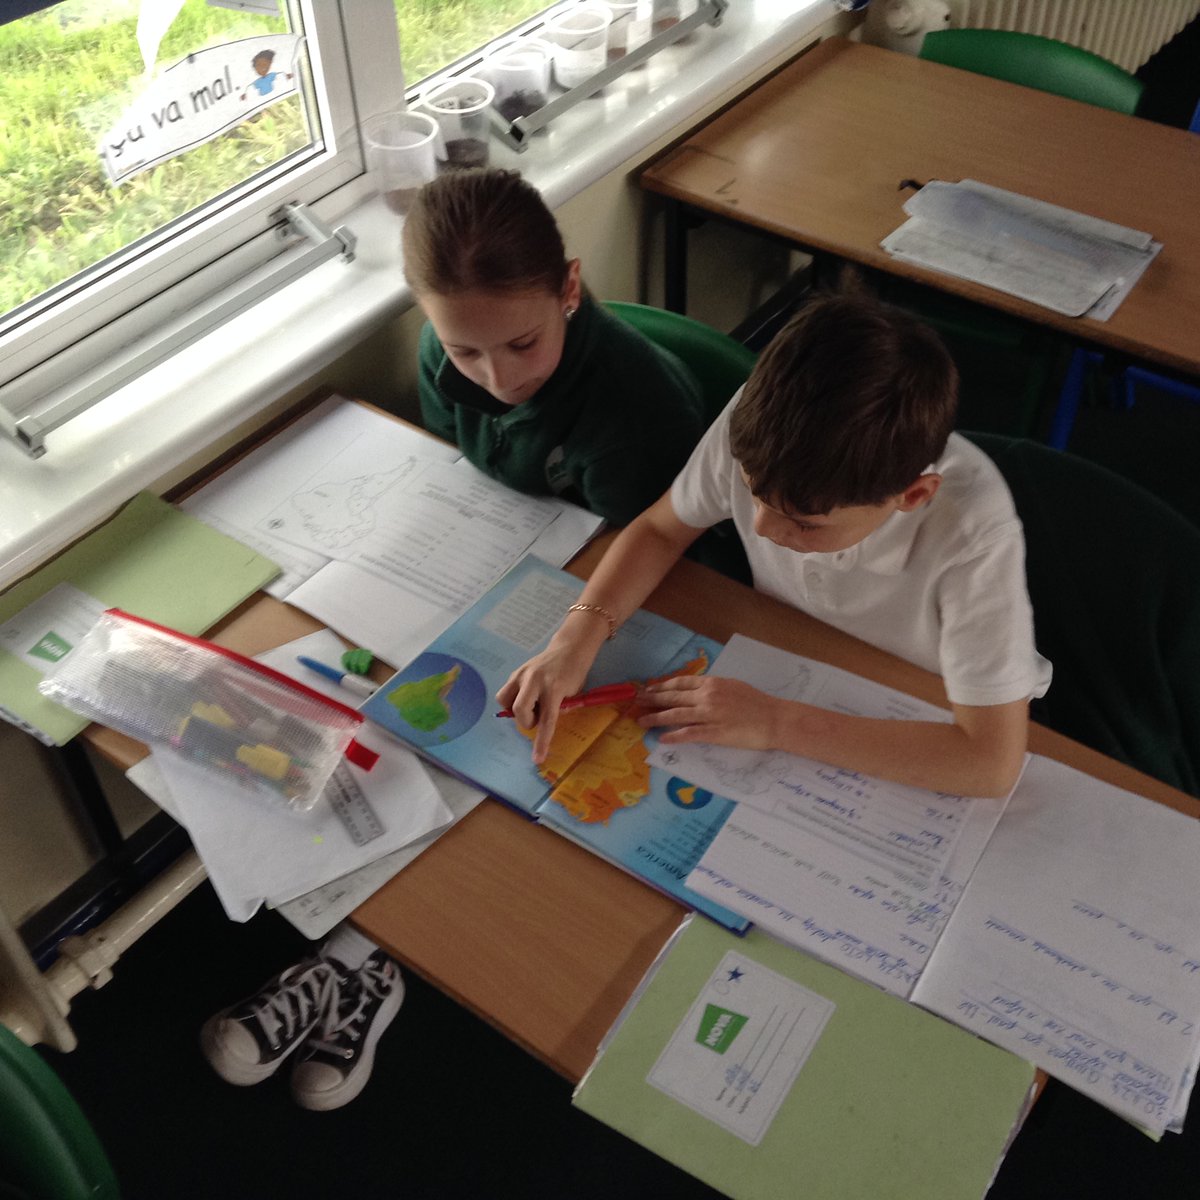 Today Year 3 have been Geographers. We have used atlases to help us locate different countries in South America and even challenged ourselves to locate rainforests, mountains and rivers! #geographers